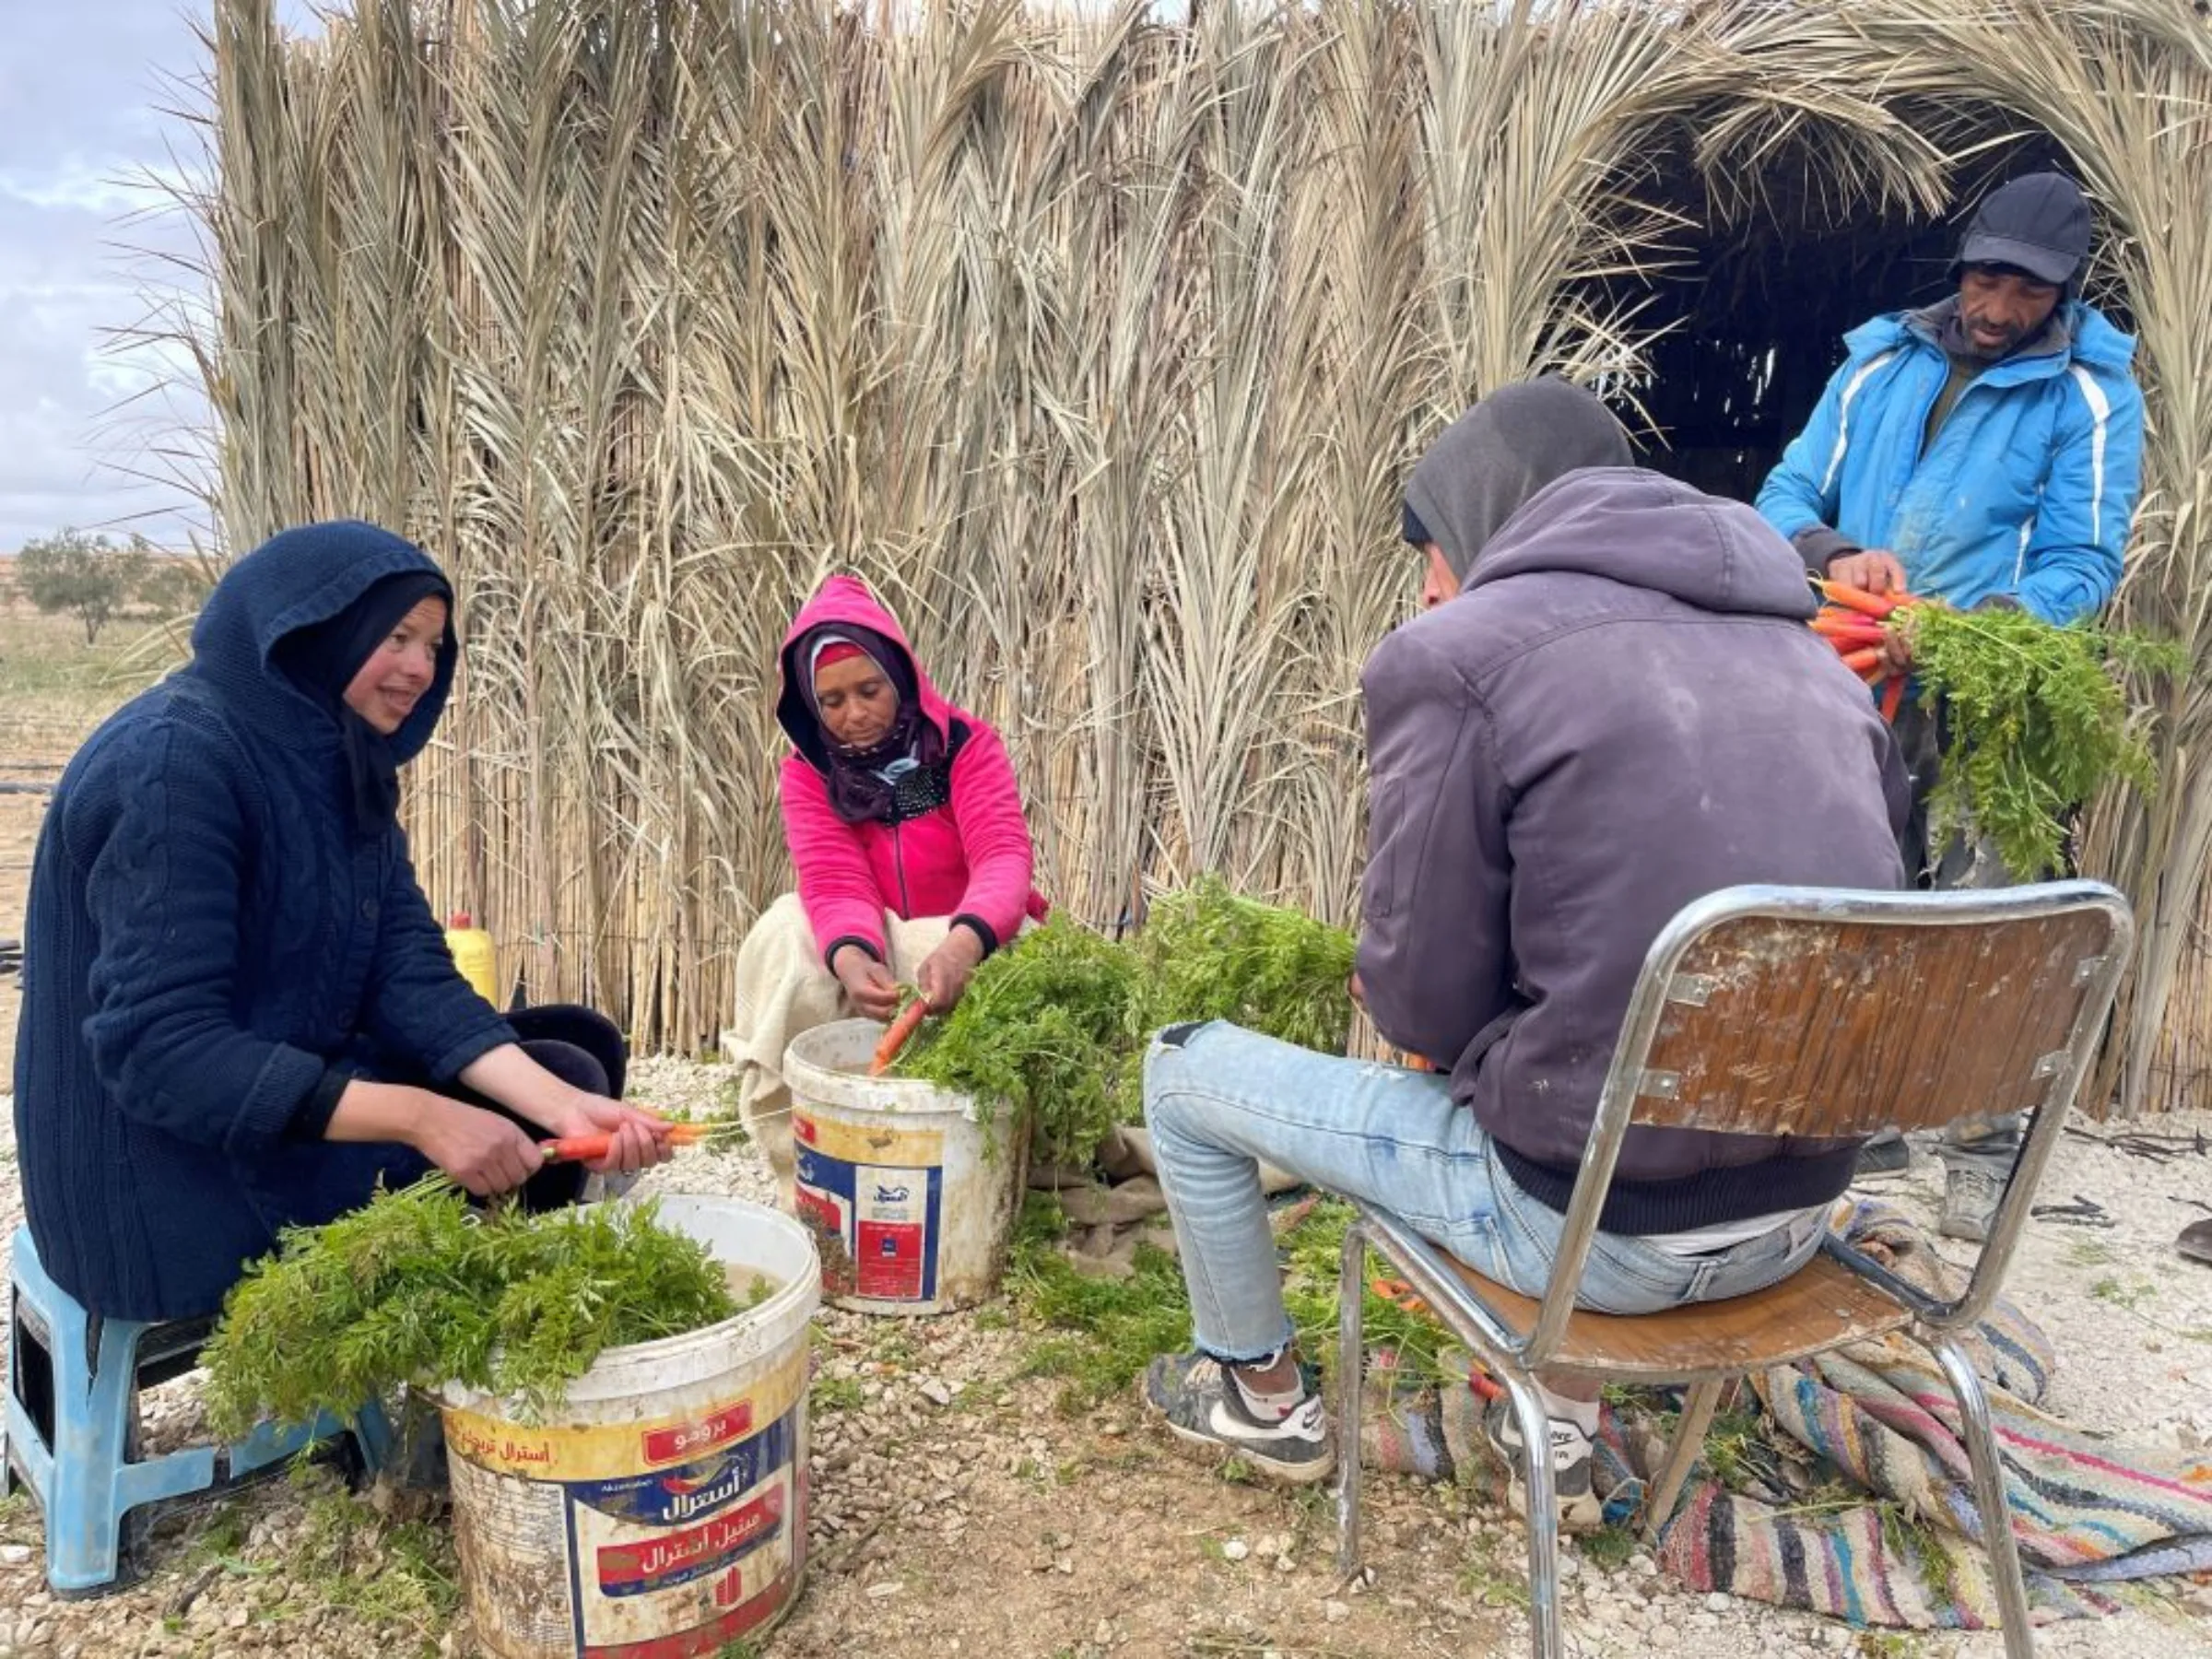 Parents of students at Makthar school work on a farm in Siliana, northern Tunisia, February 3, 2023